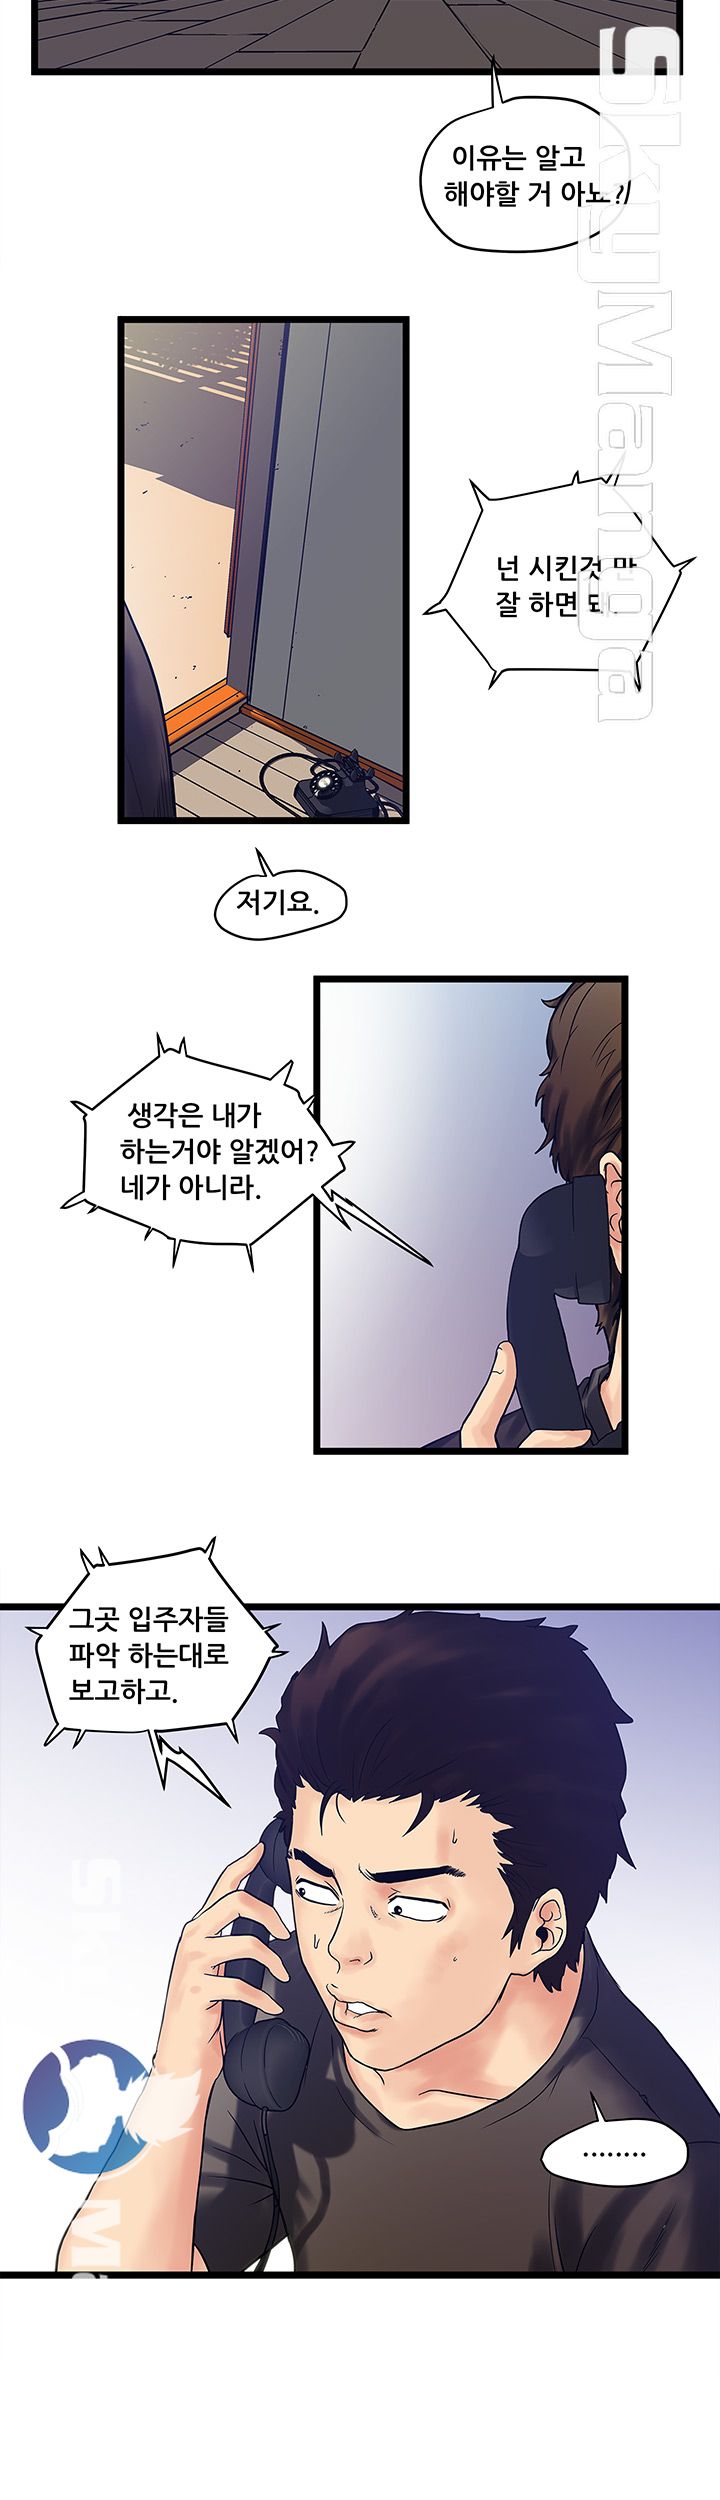 Safe House Raw - Chapter 2 Page 2